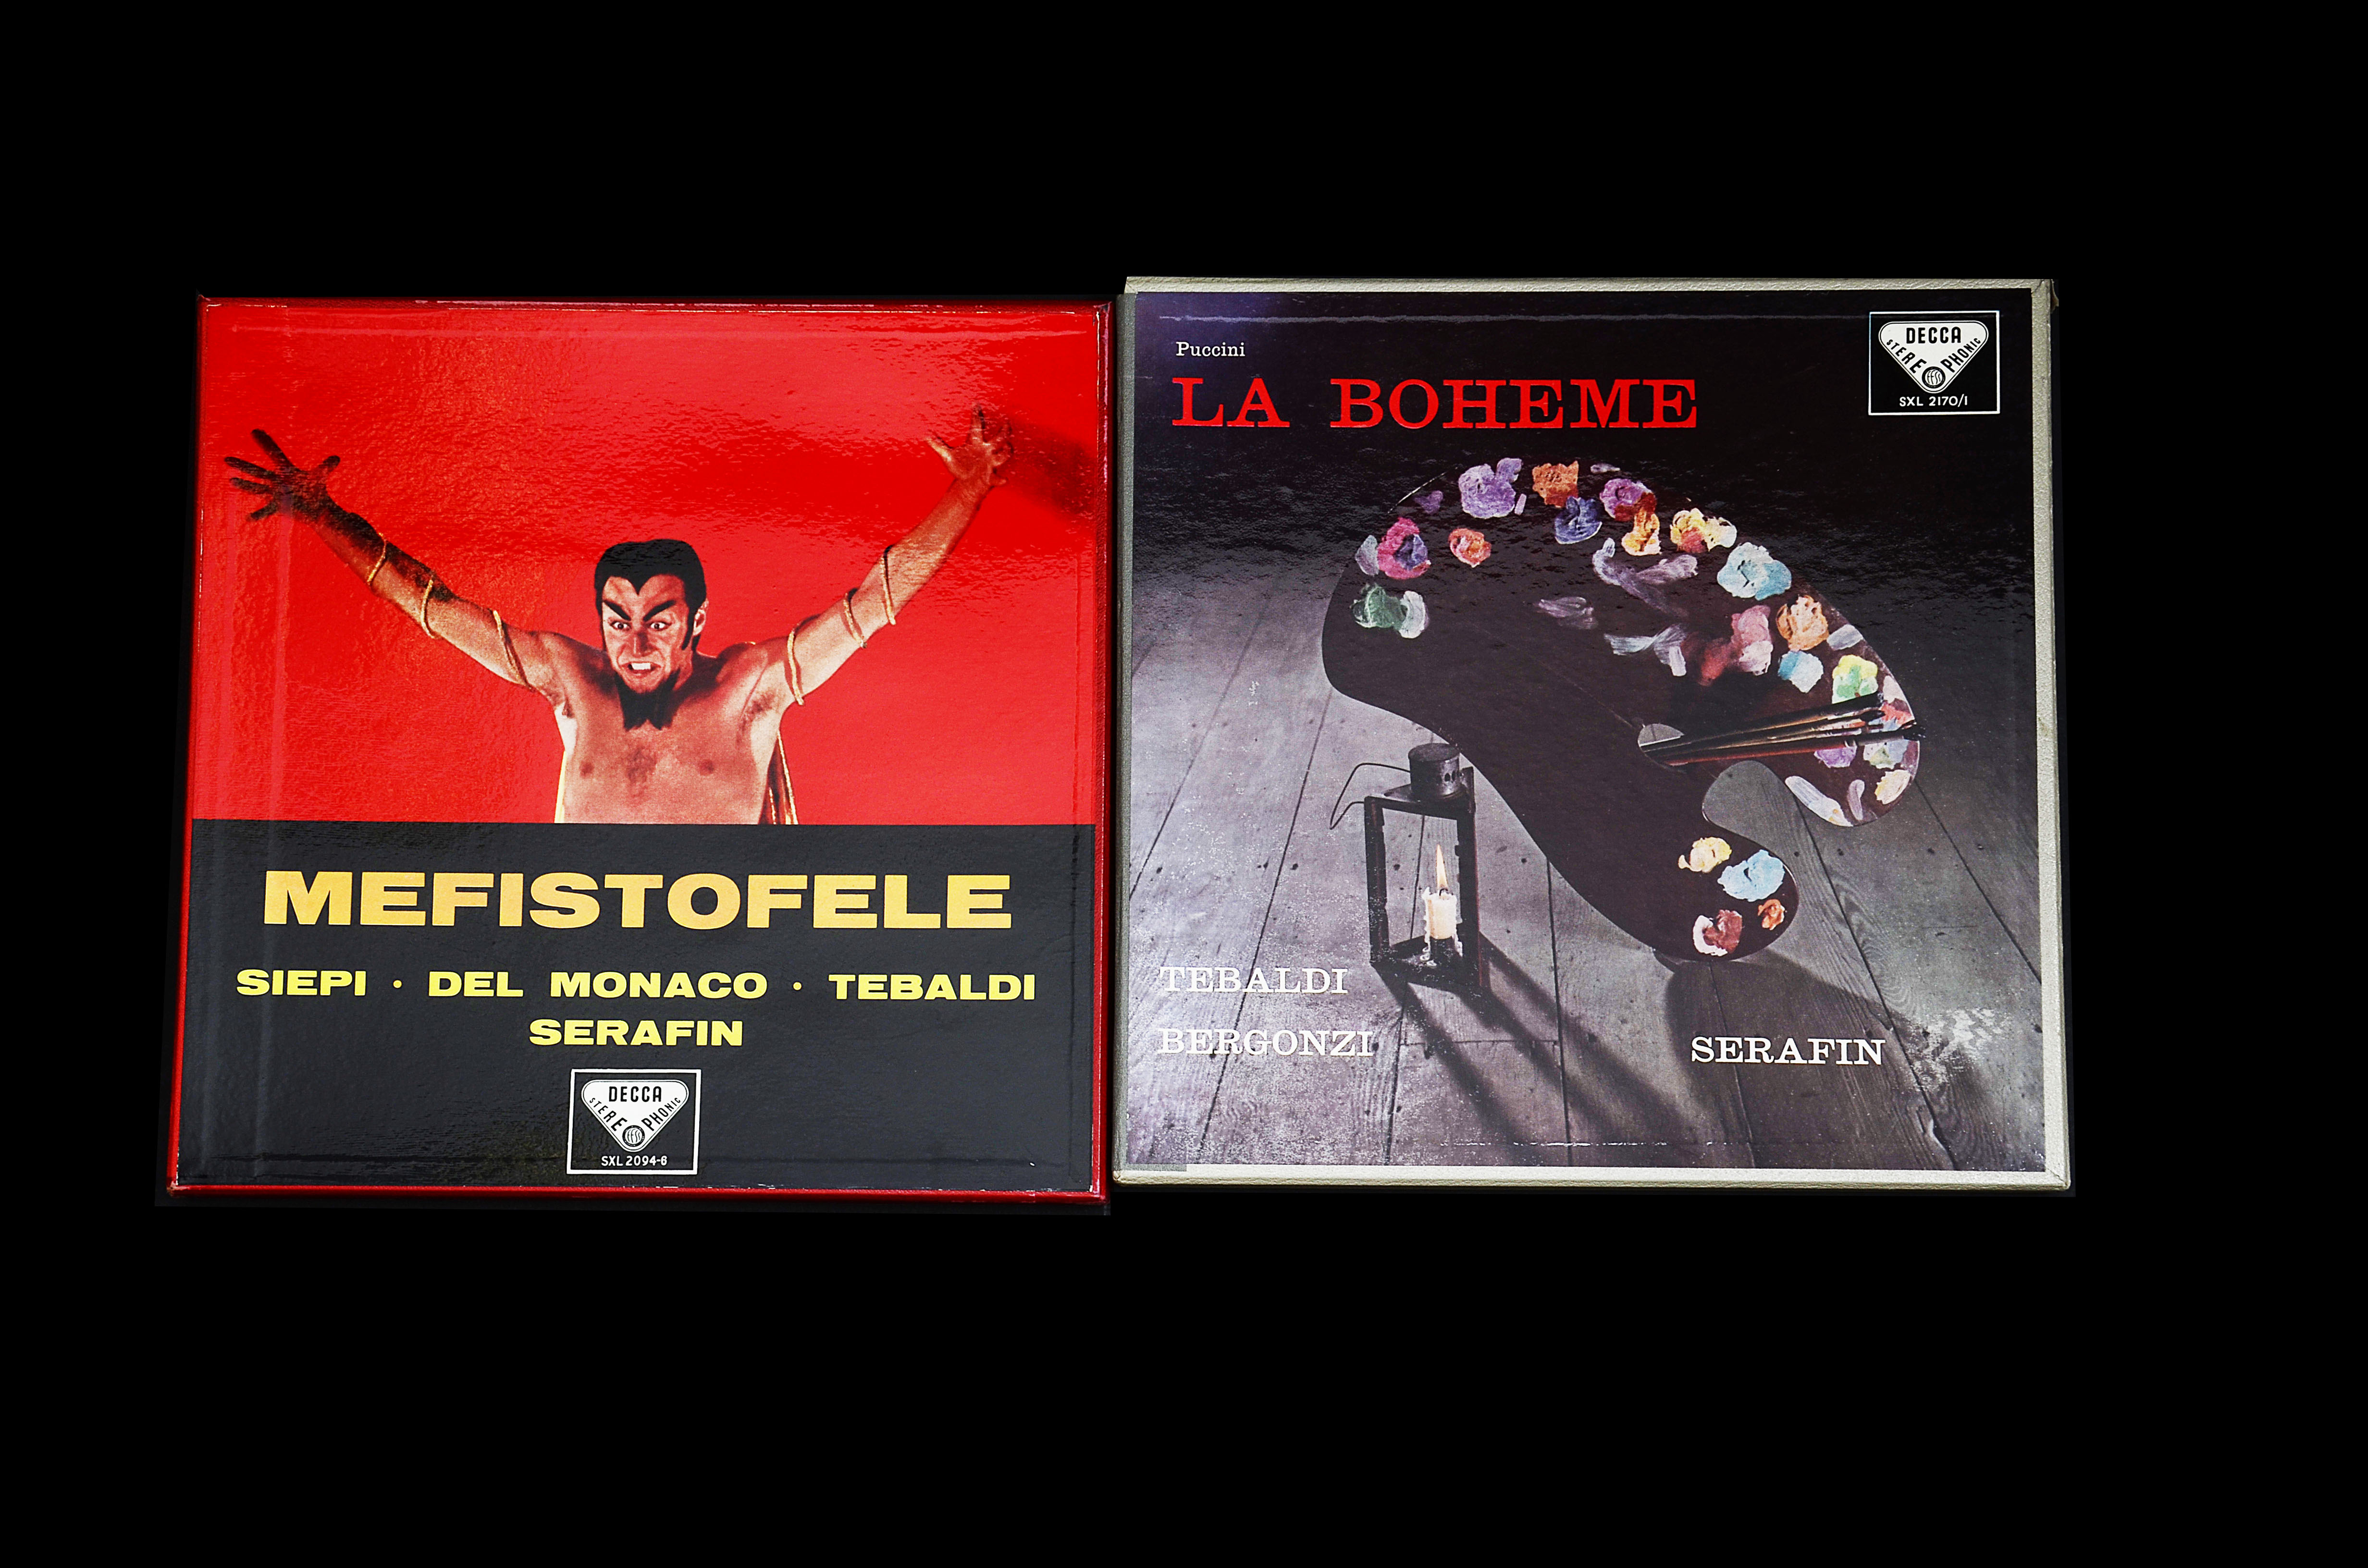 Opera, Two First Press Stereo Box Sets on Decca - SXL 2170/1 and SXL 2094-6 - both complete and in